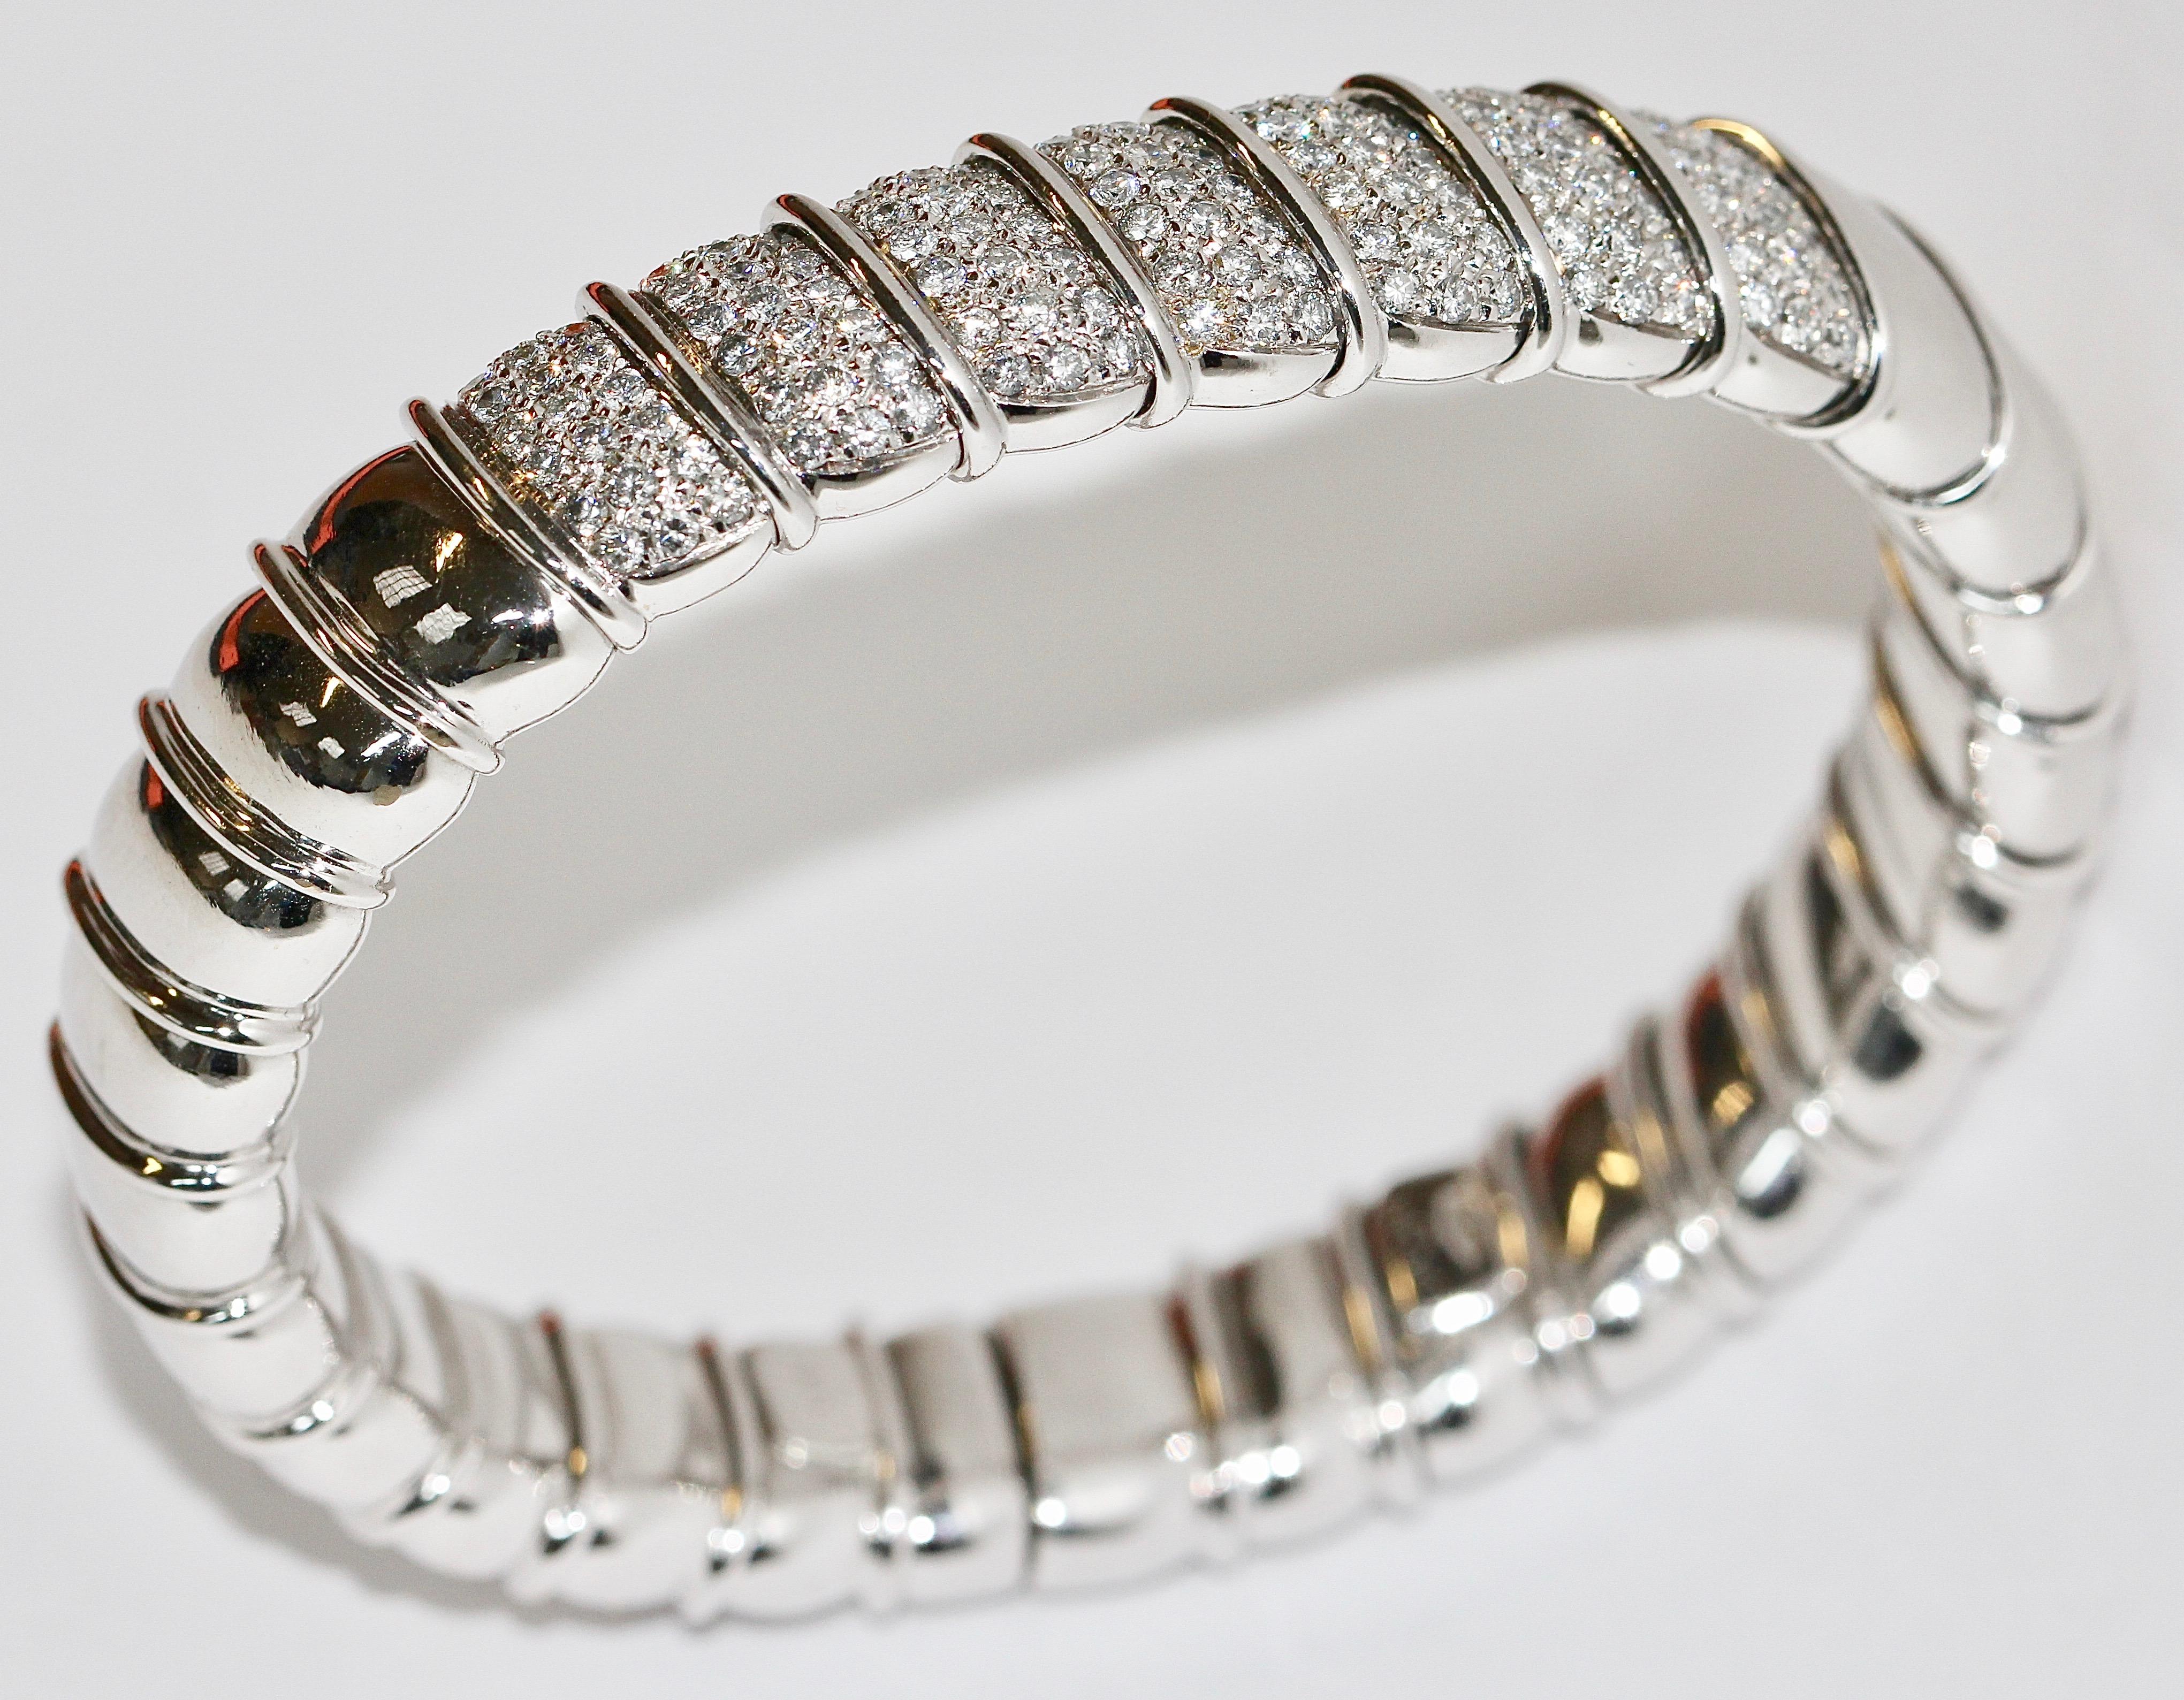 High-quality, solid luxury bangle, 18k white gold, set with diamonds.